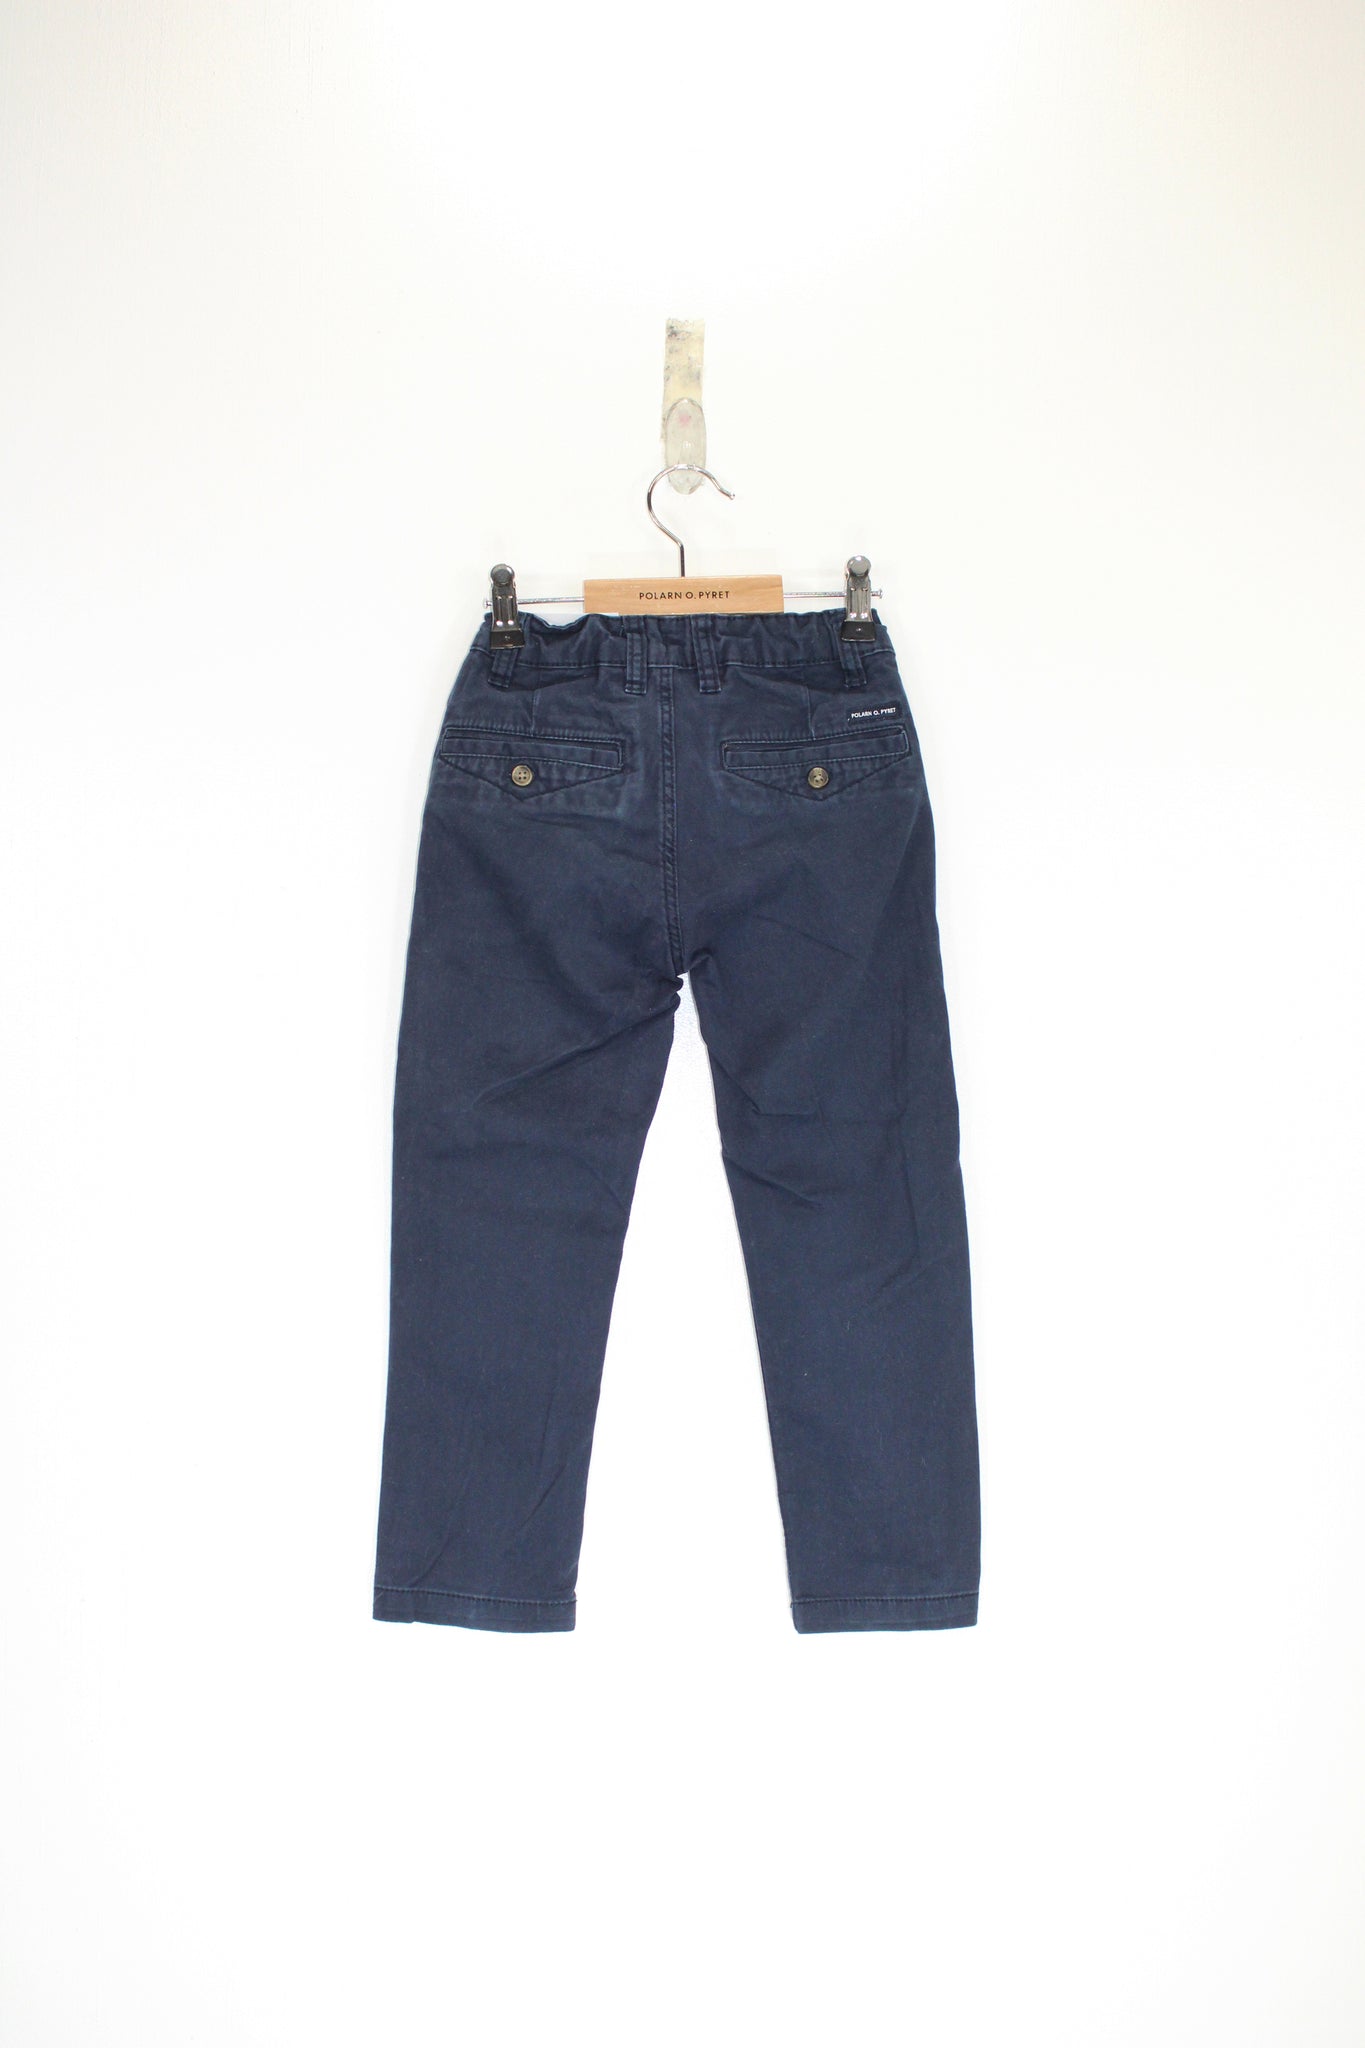 Kids Chino Trousers 4-5y / 110